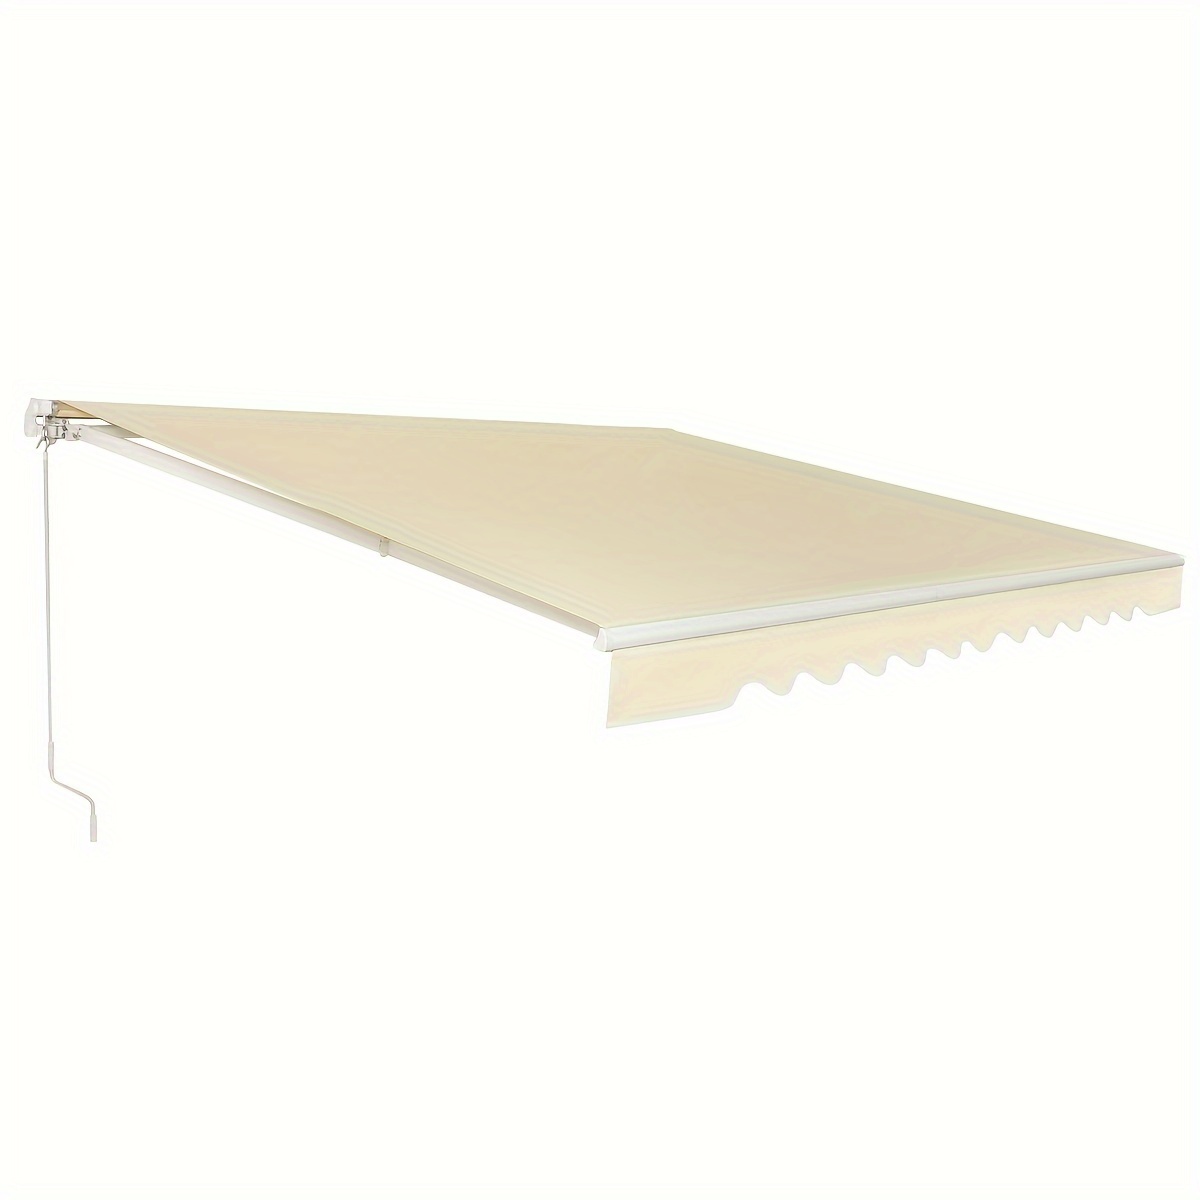 

12'×10'ft Retractable Patio Awning Aluminum Deck Sunshade Shelter Outdoor Beige